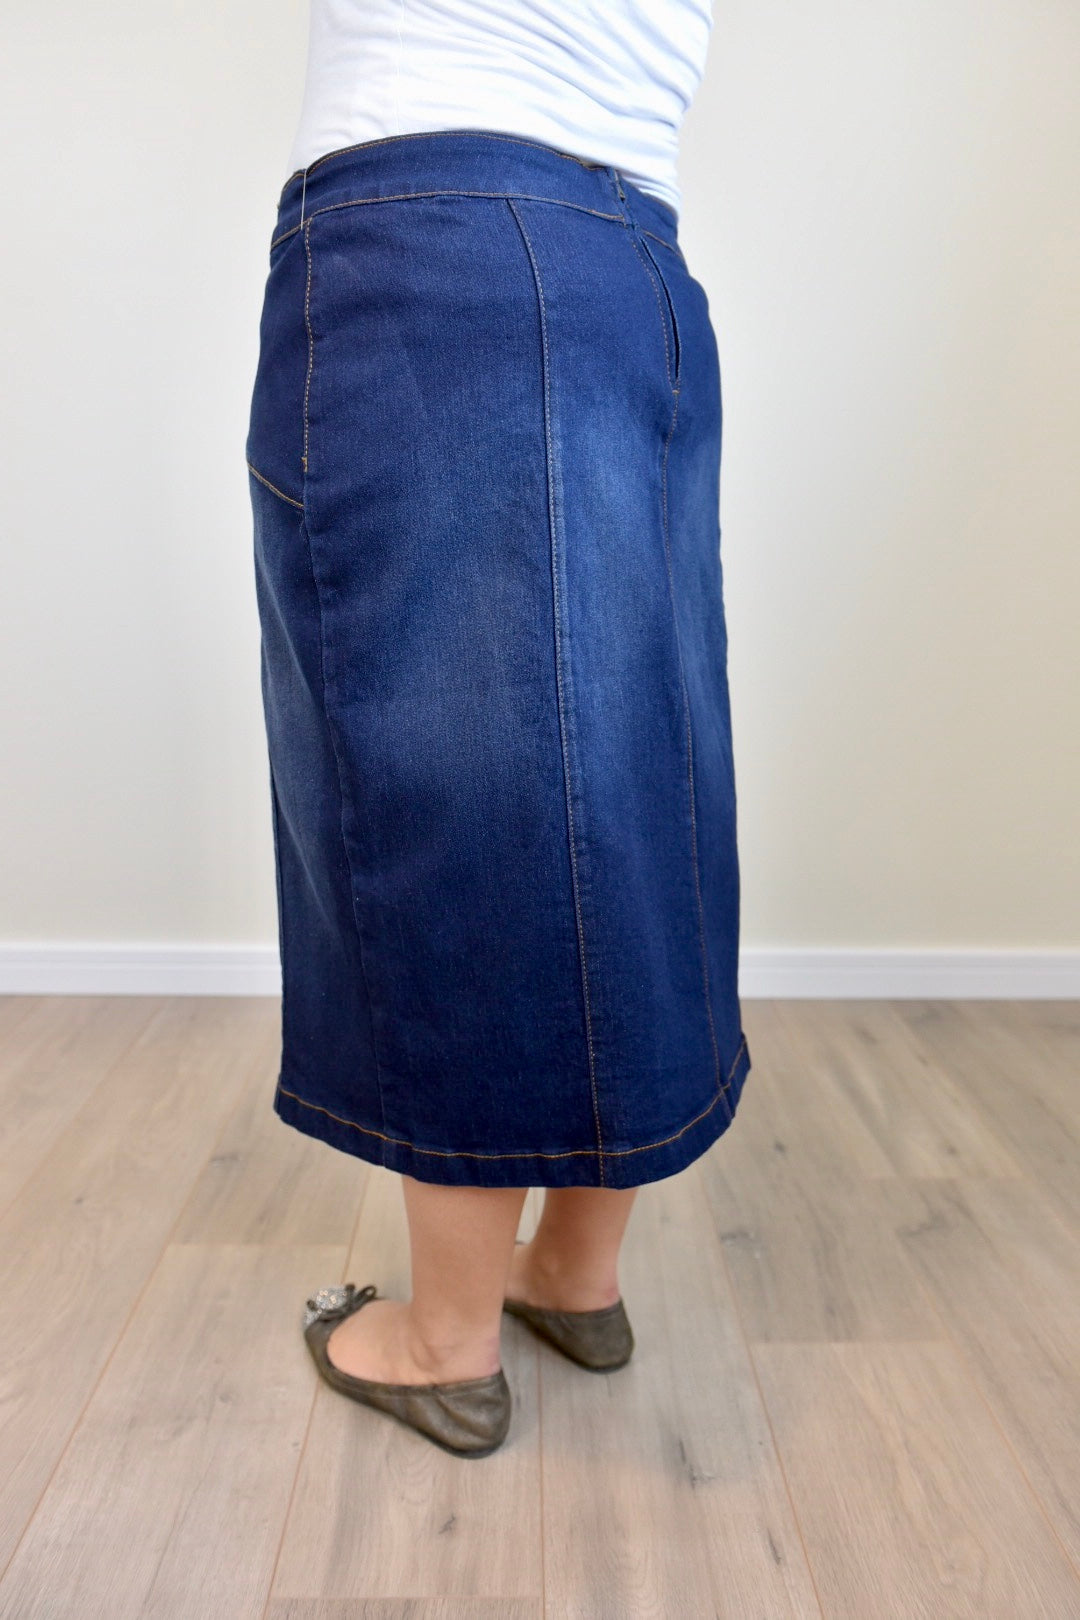 "Charlotte" Calf Length Denim Skirt With Front Buttons - Ladies & Lavender Boutique